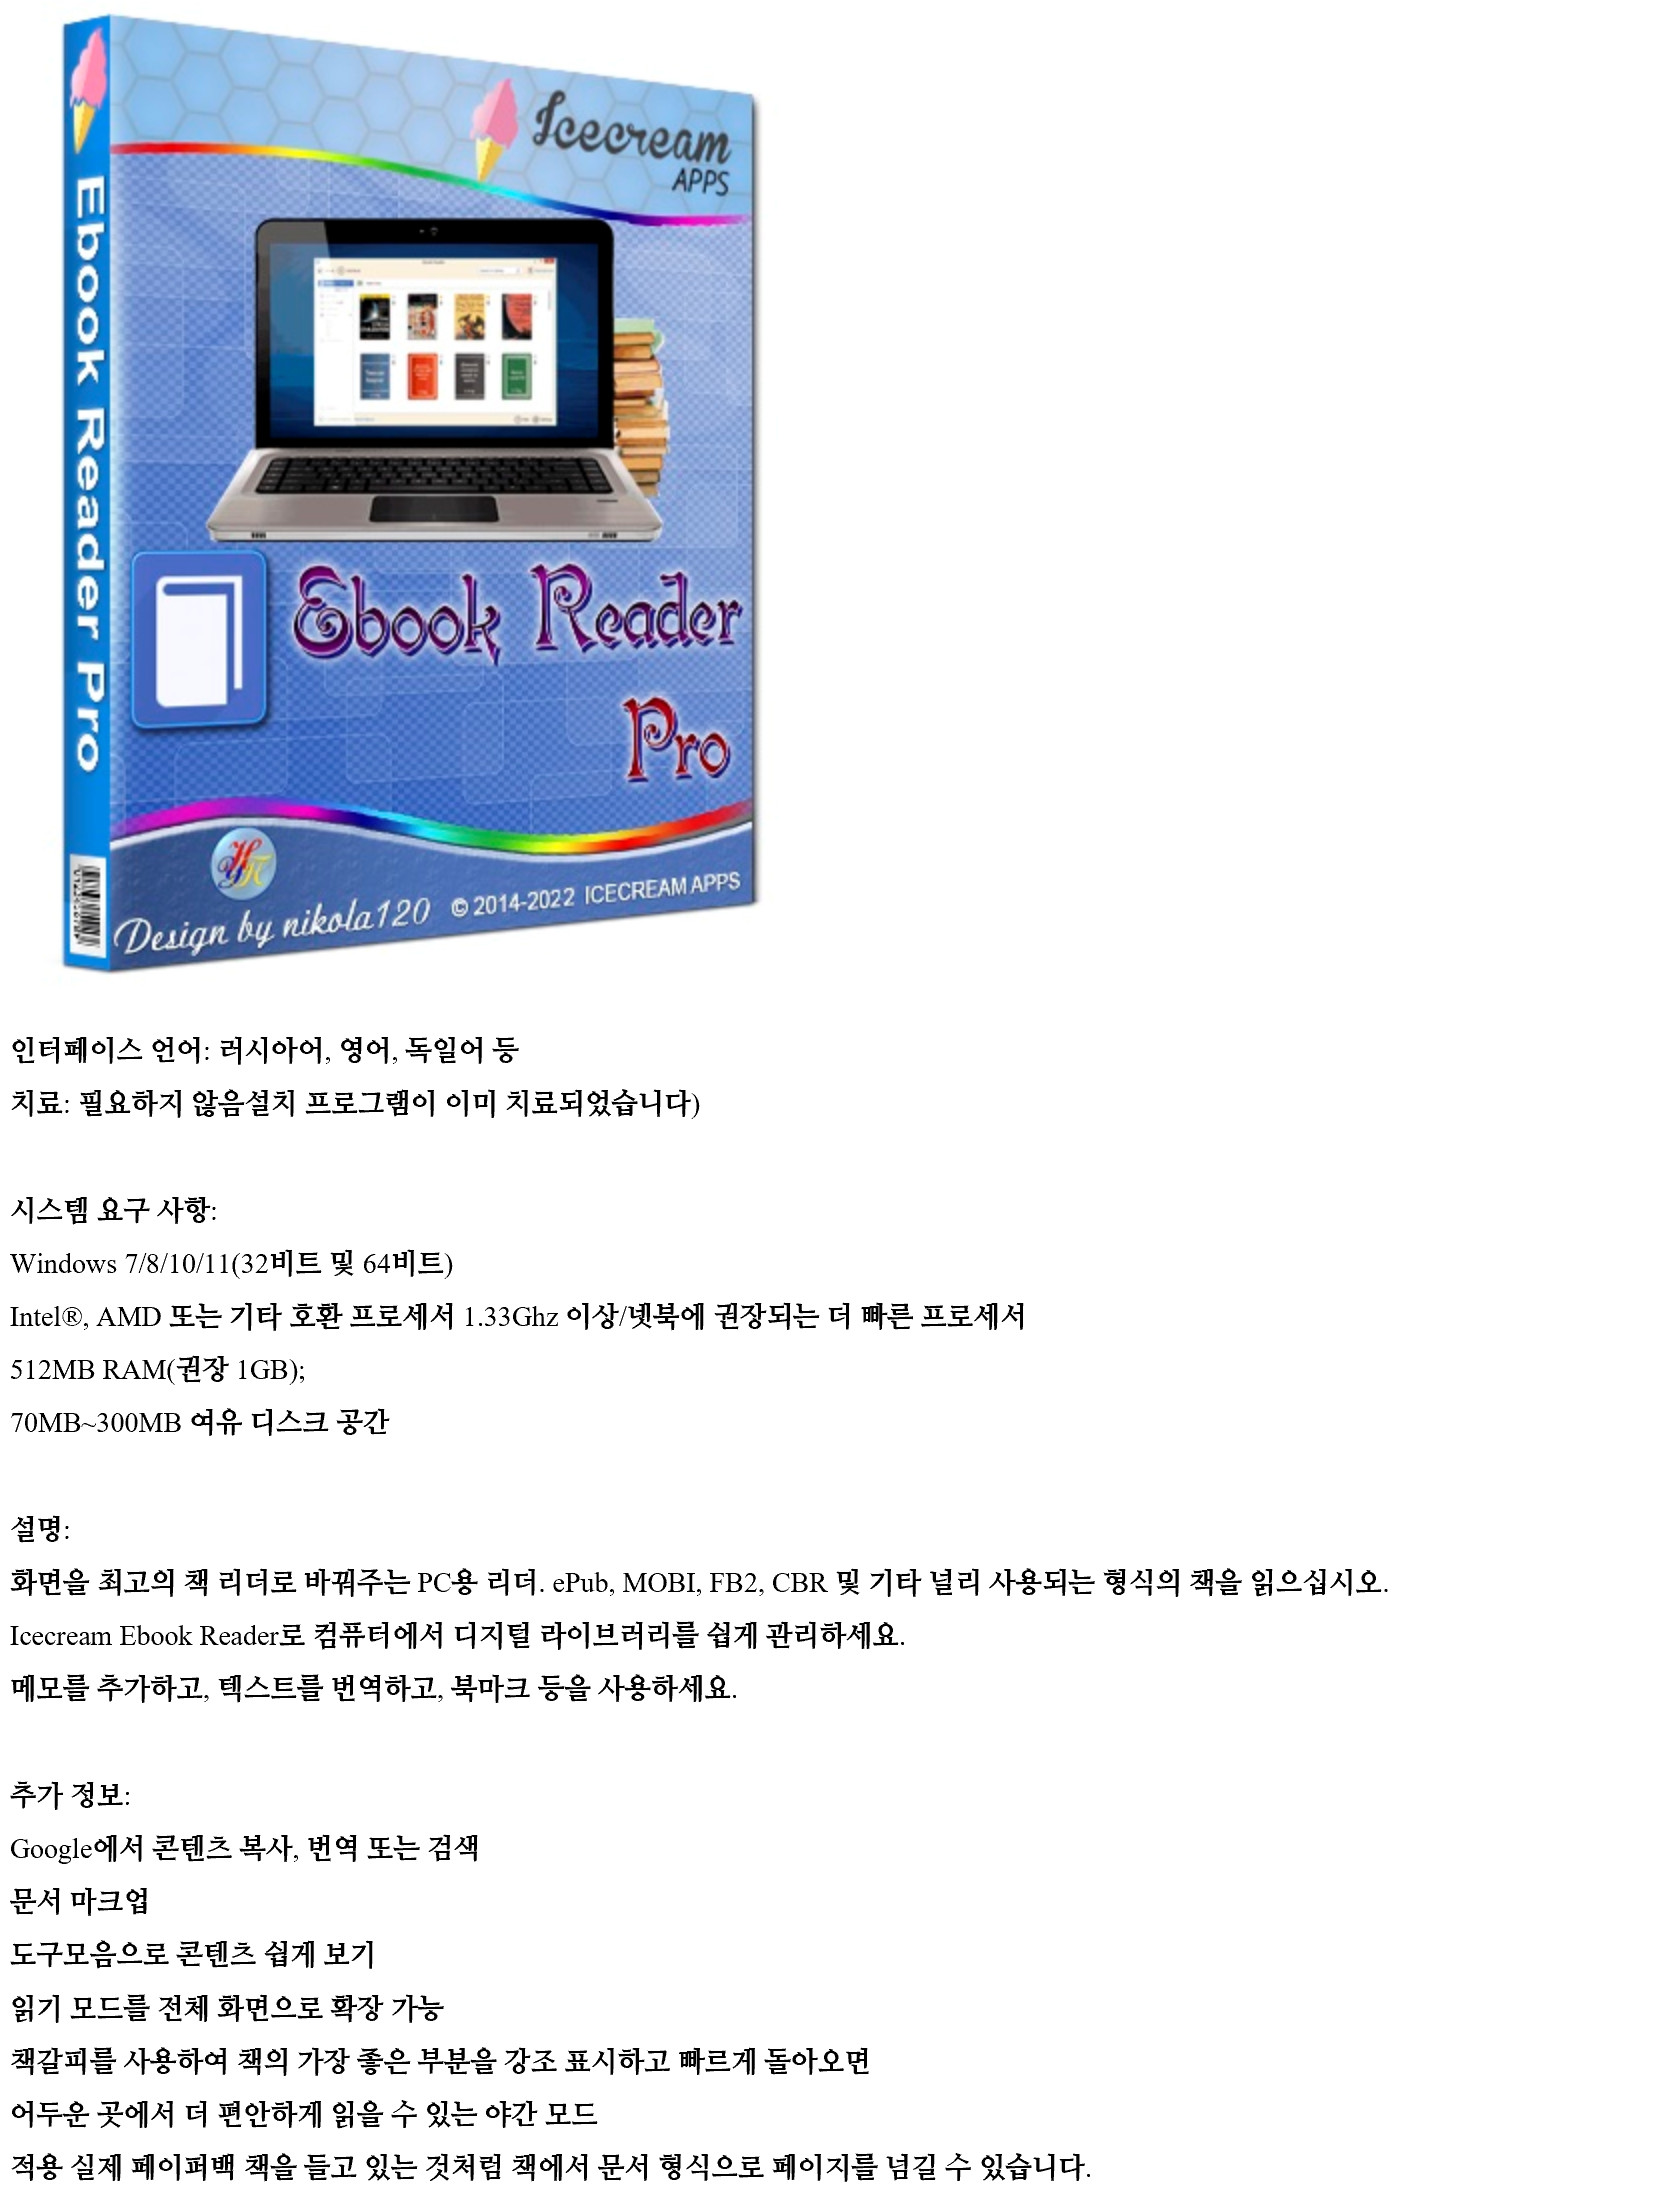 IceCream Ebook Reader 6.37 Pro instal the new version for apple